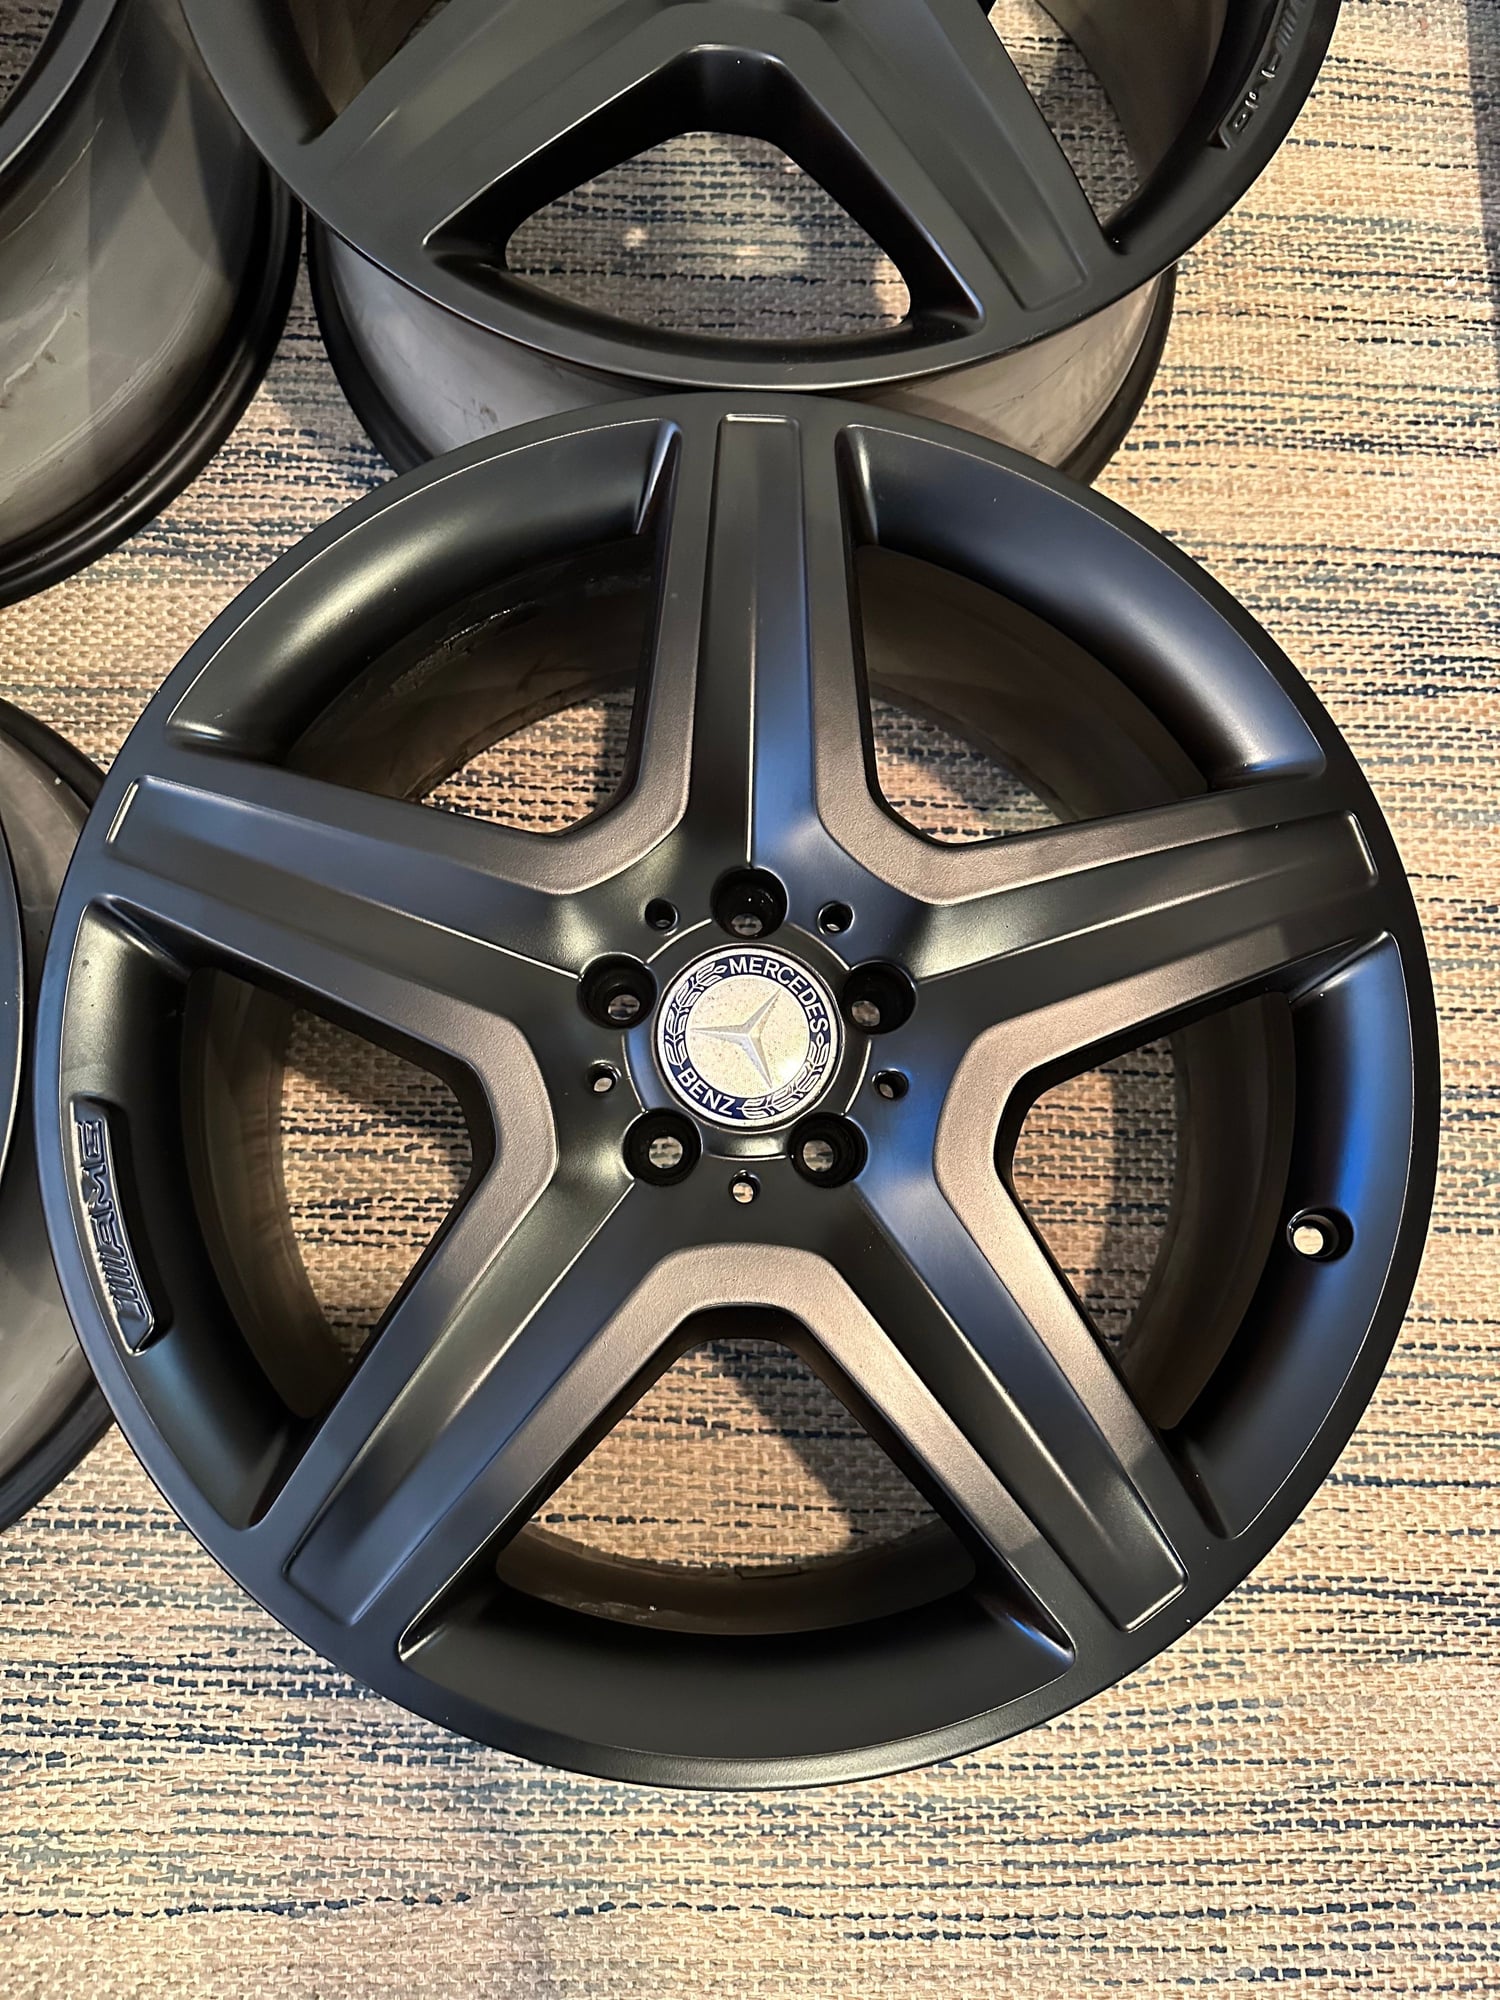 Wheels and Tires/Axles - 20" OEM Mercedes Benz GL ML AMG Wheels - Like NEW - Satin Black - Used - 0  All Models - Plymouth, MN 55447, United States